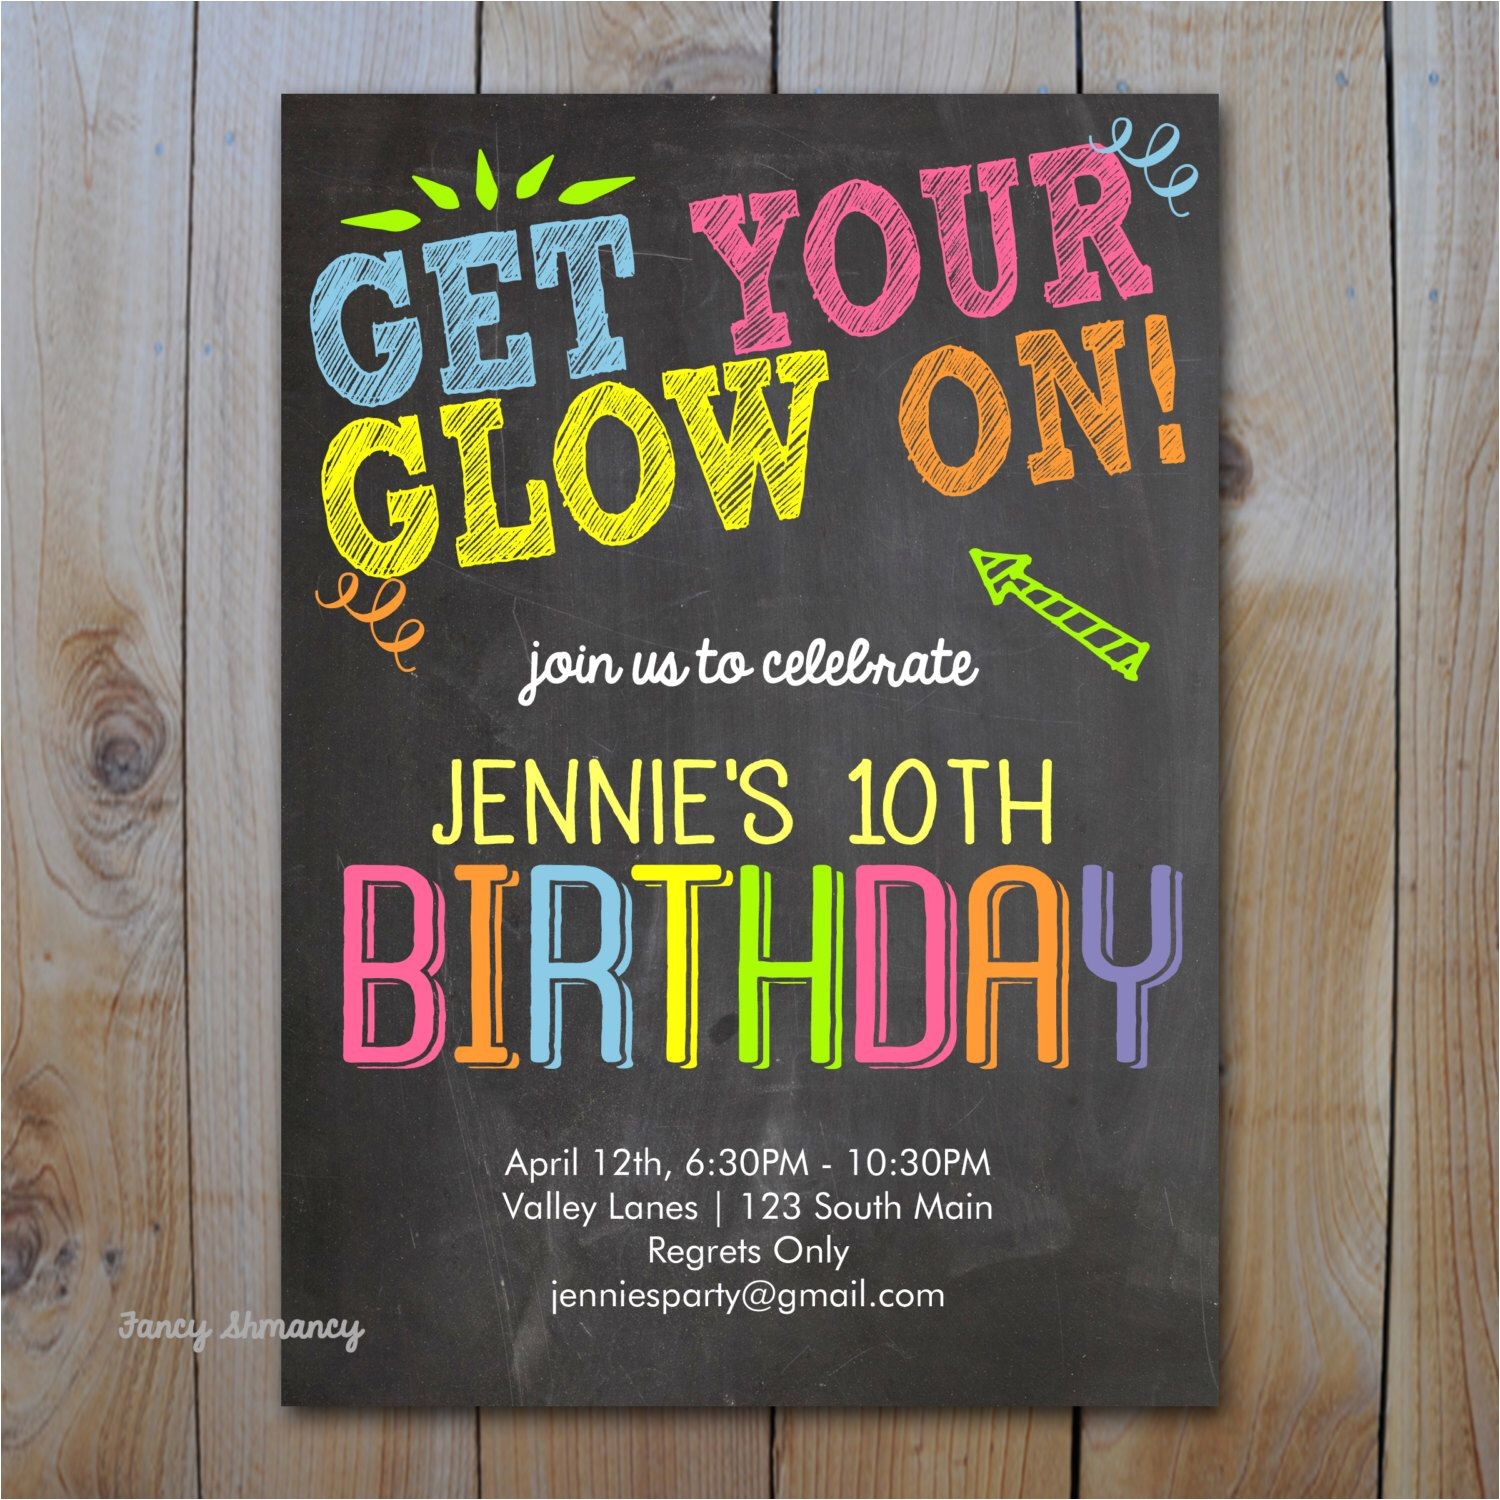 Glow In the Dark Party Invitations Free Neon Birthday Invitation Get Your Glow On Glow In the